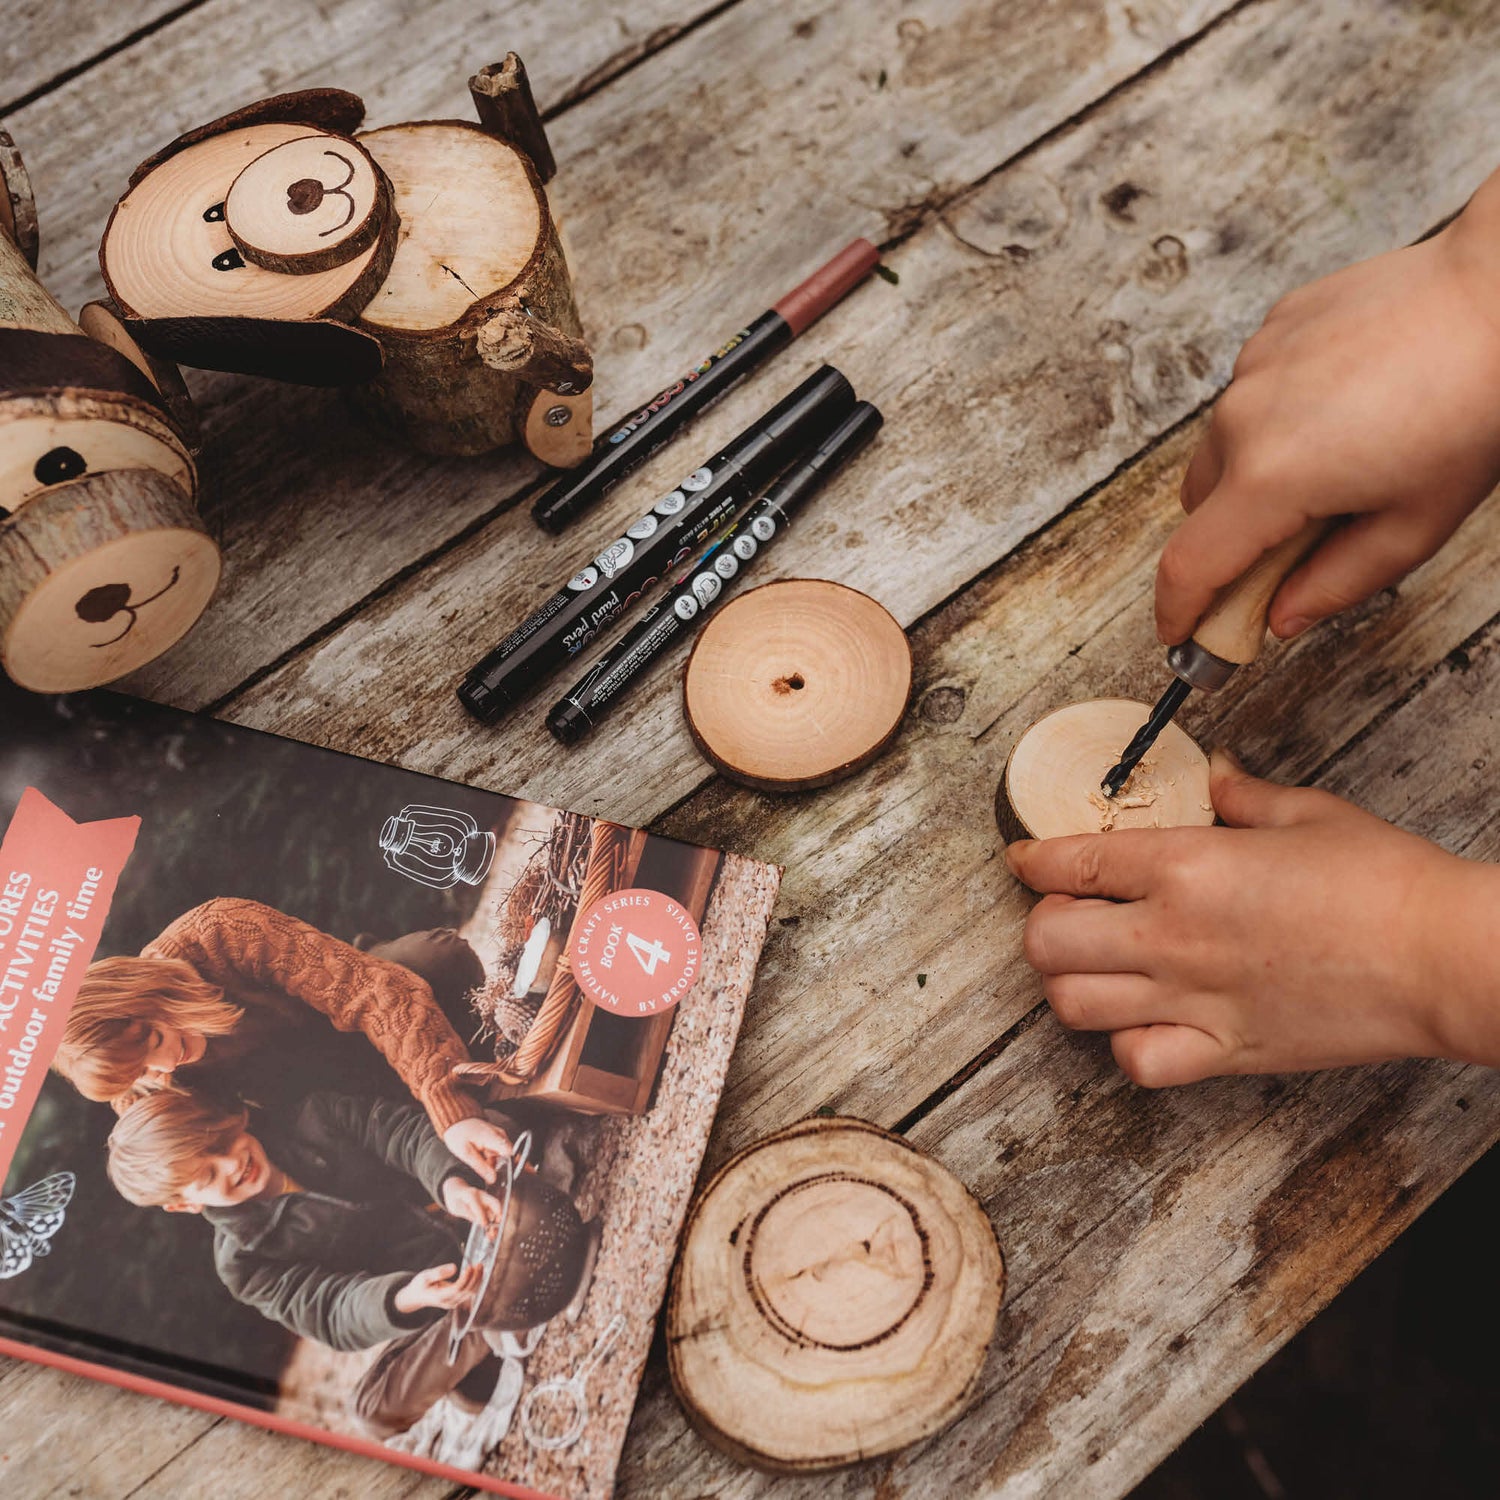 Child drilling a hole in wood to make a log dog from Real Tools Bundle by Your Wild Books includes Wild Projects for Families book, whittling knife, hand drill and fire starter.